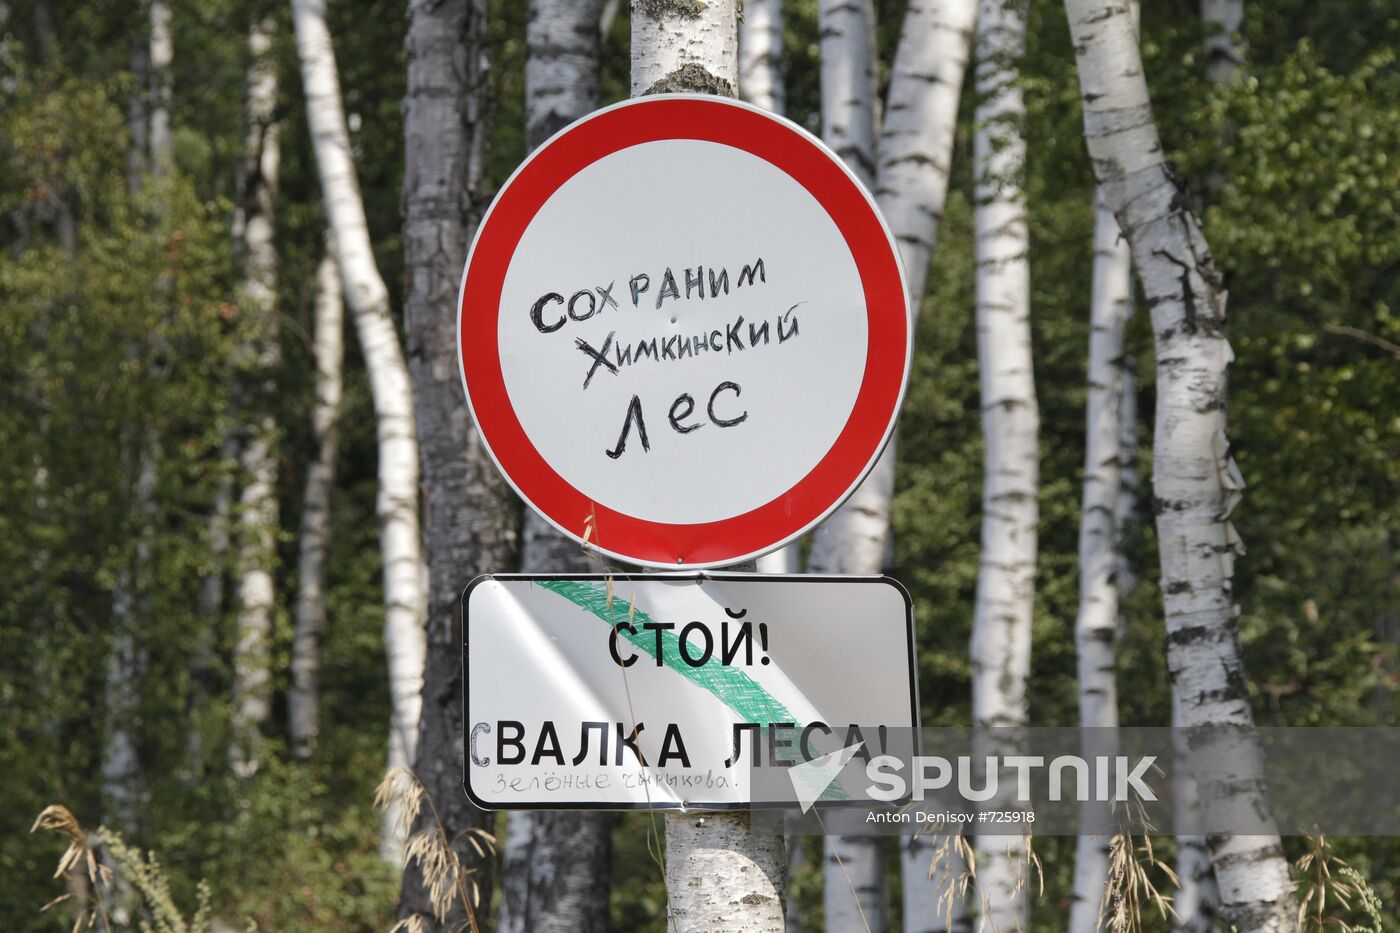 Khimki forest amidst environmental protests